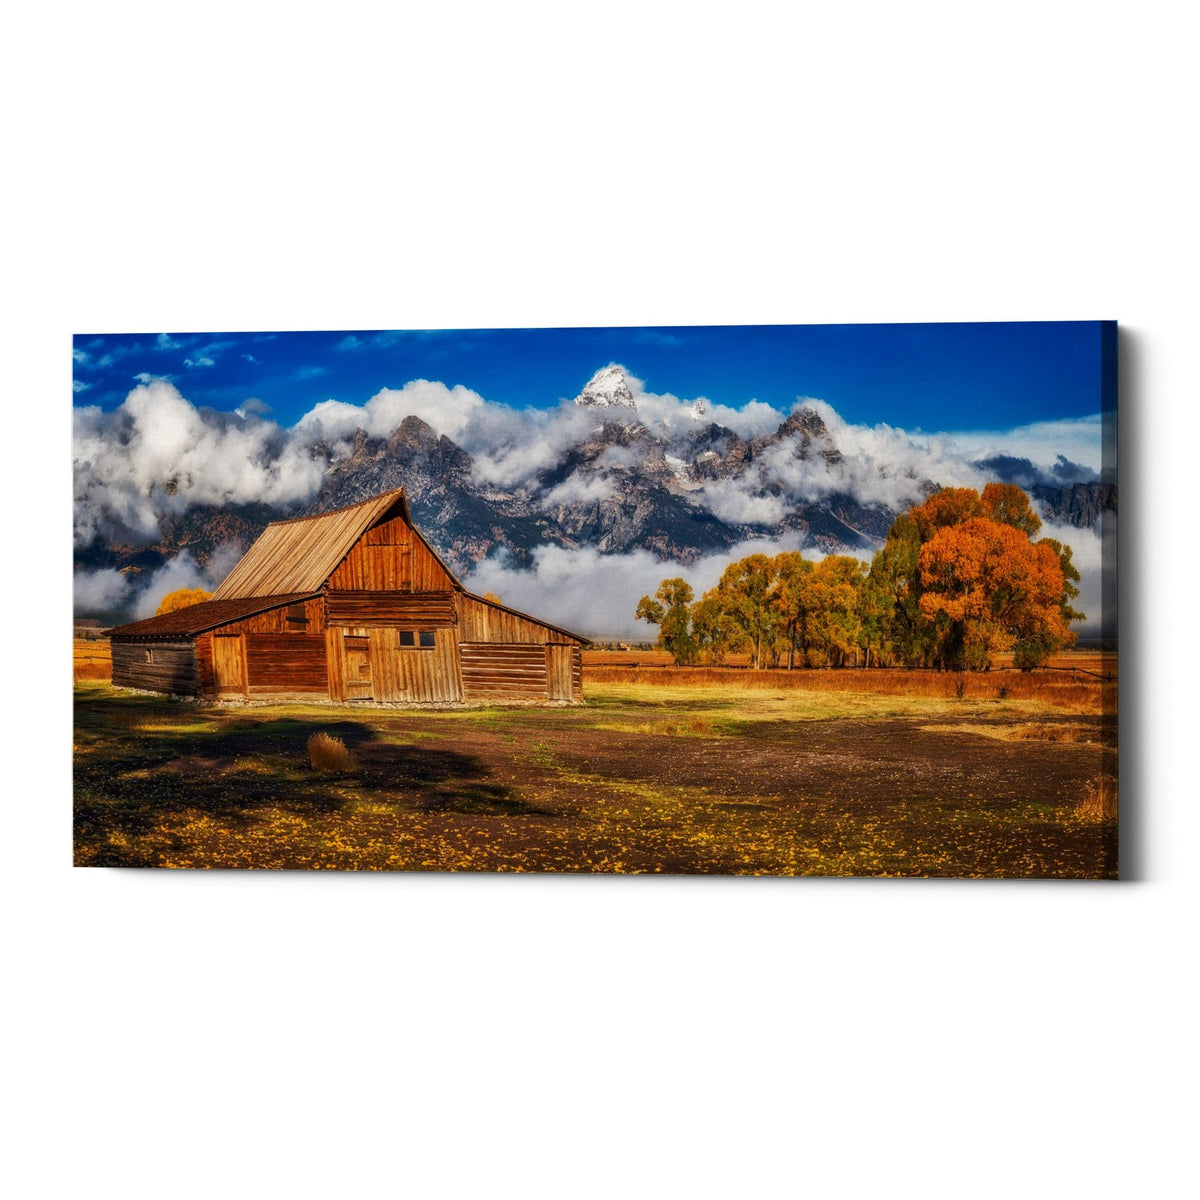 Epic Graffiti &quot;Warm Morning Light in the Tetons&quot; by Darren White, Giclee Canvas Wall Art